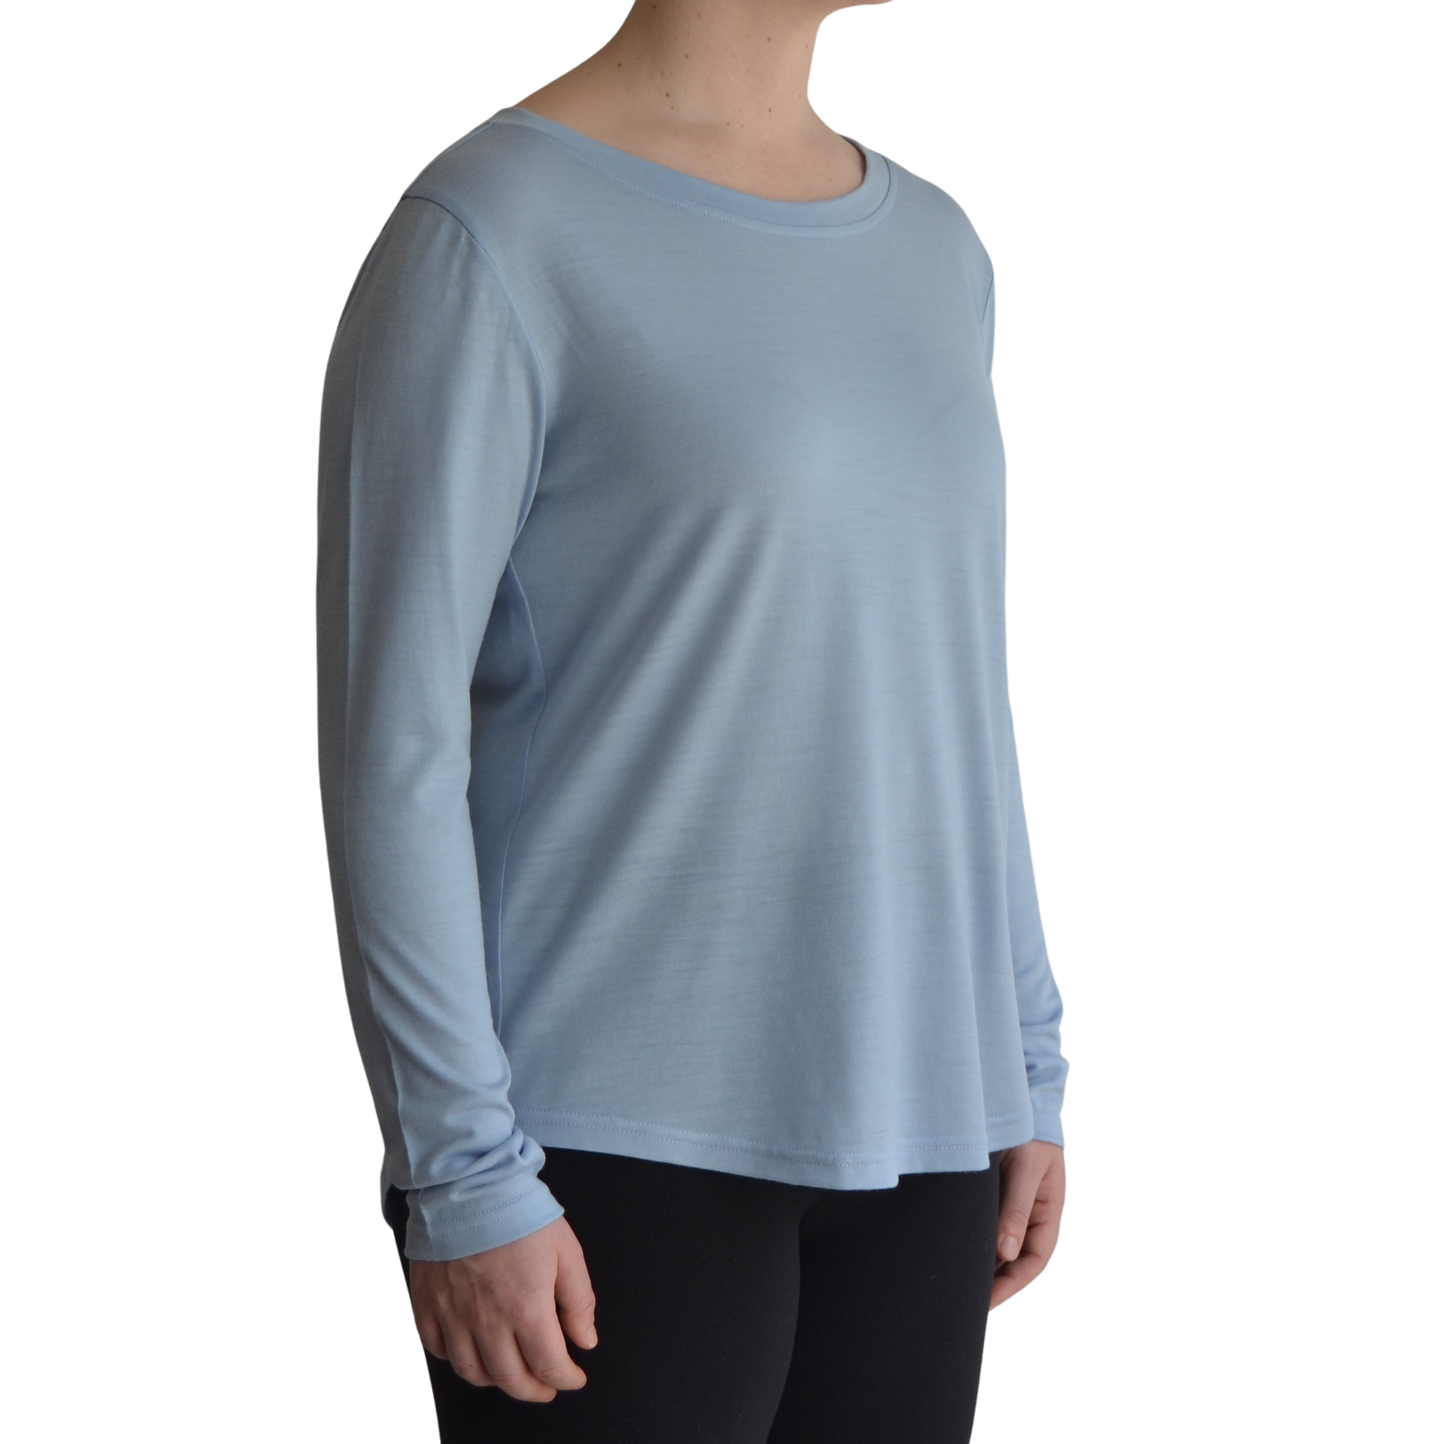 Links long sleeve merino top in ice blue colour. The model is standing on 45 degree angle facing forward